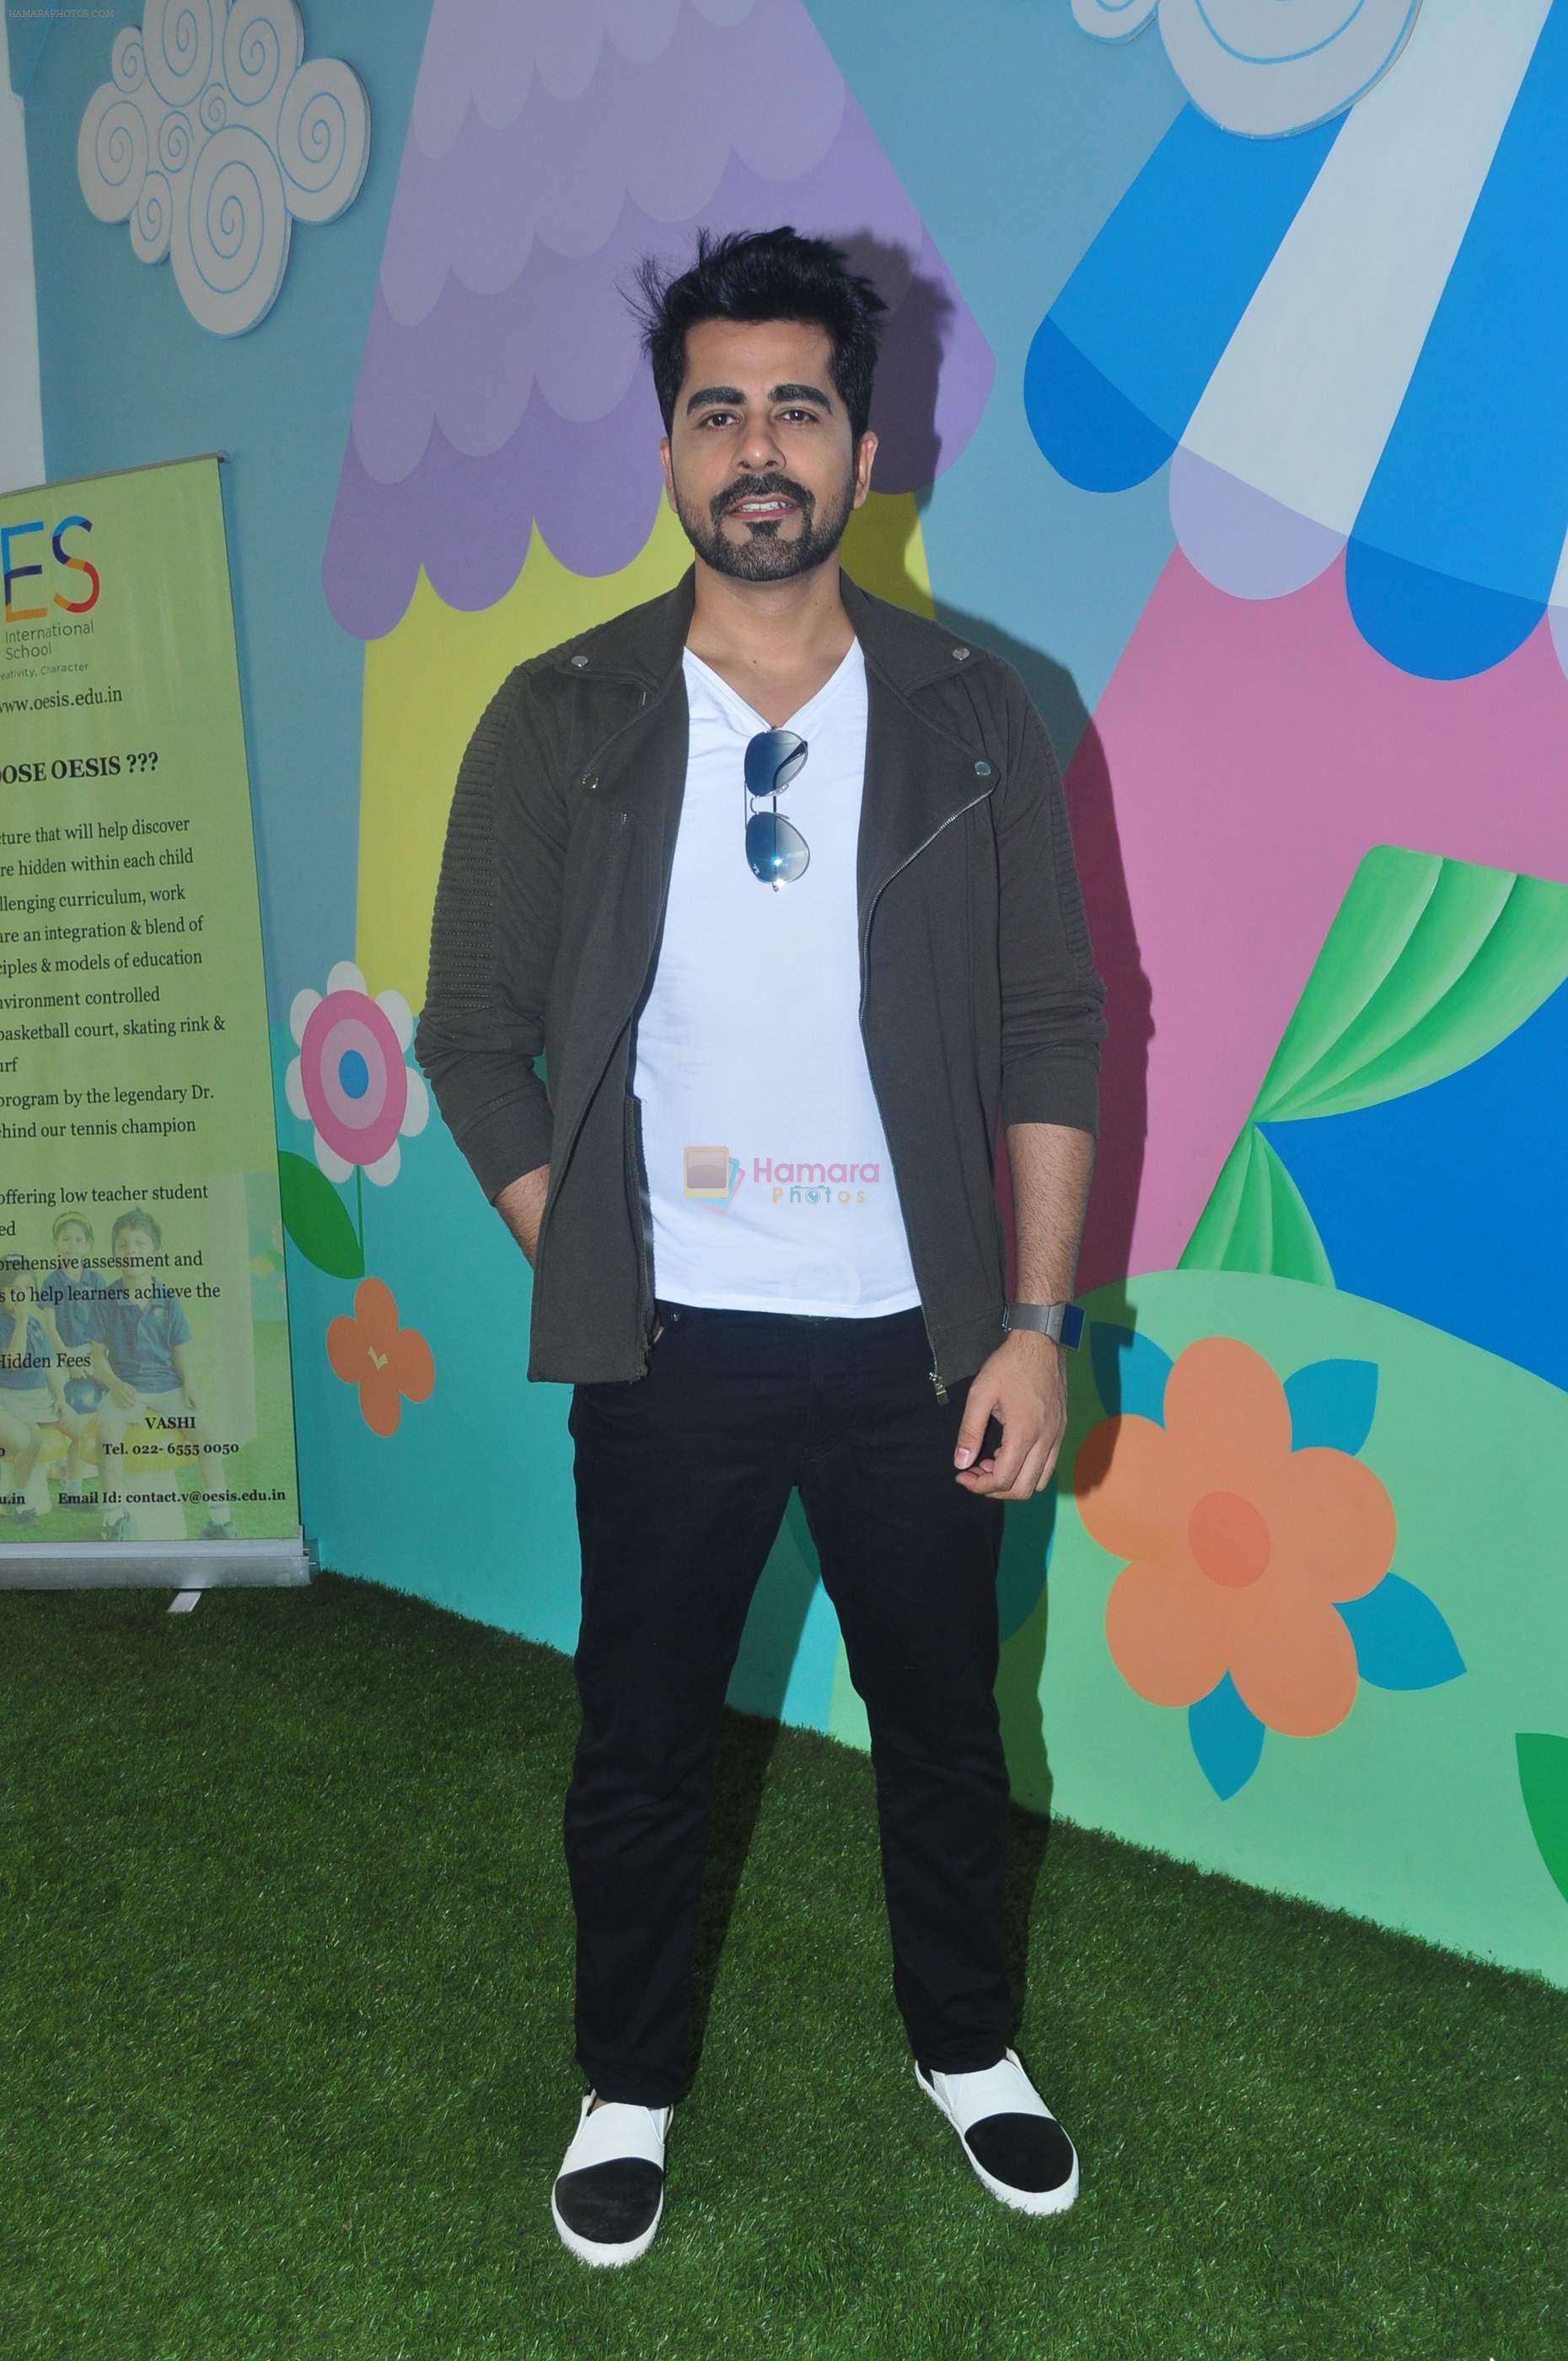 at a charity event on 3rd March 2016